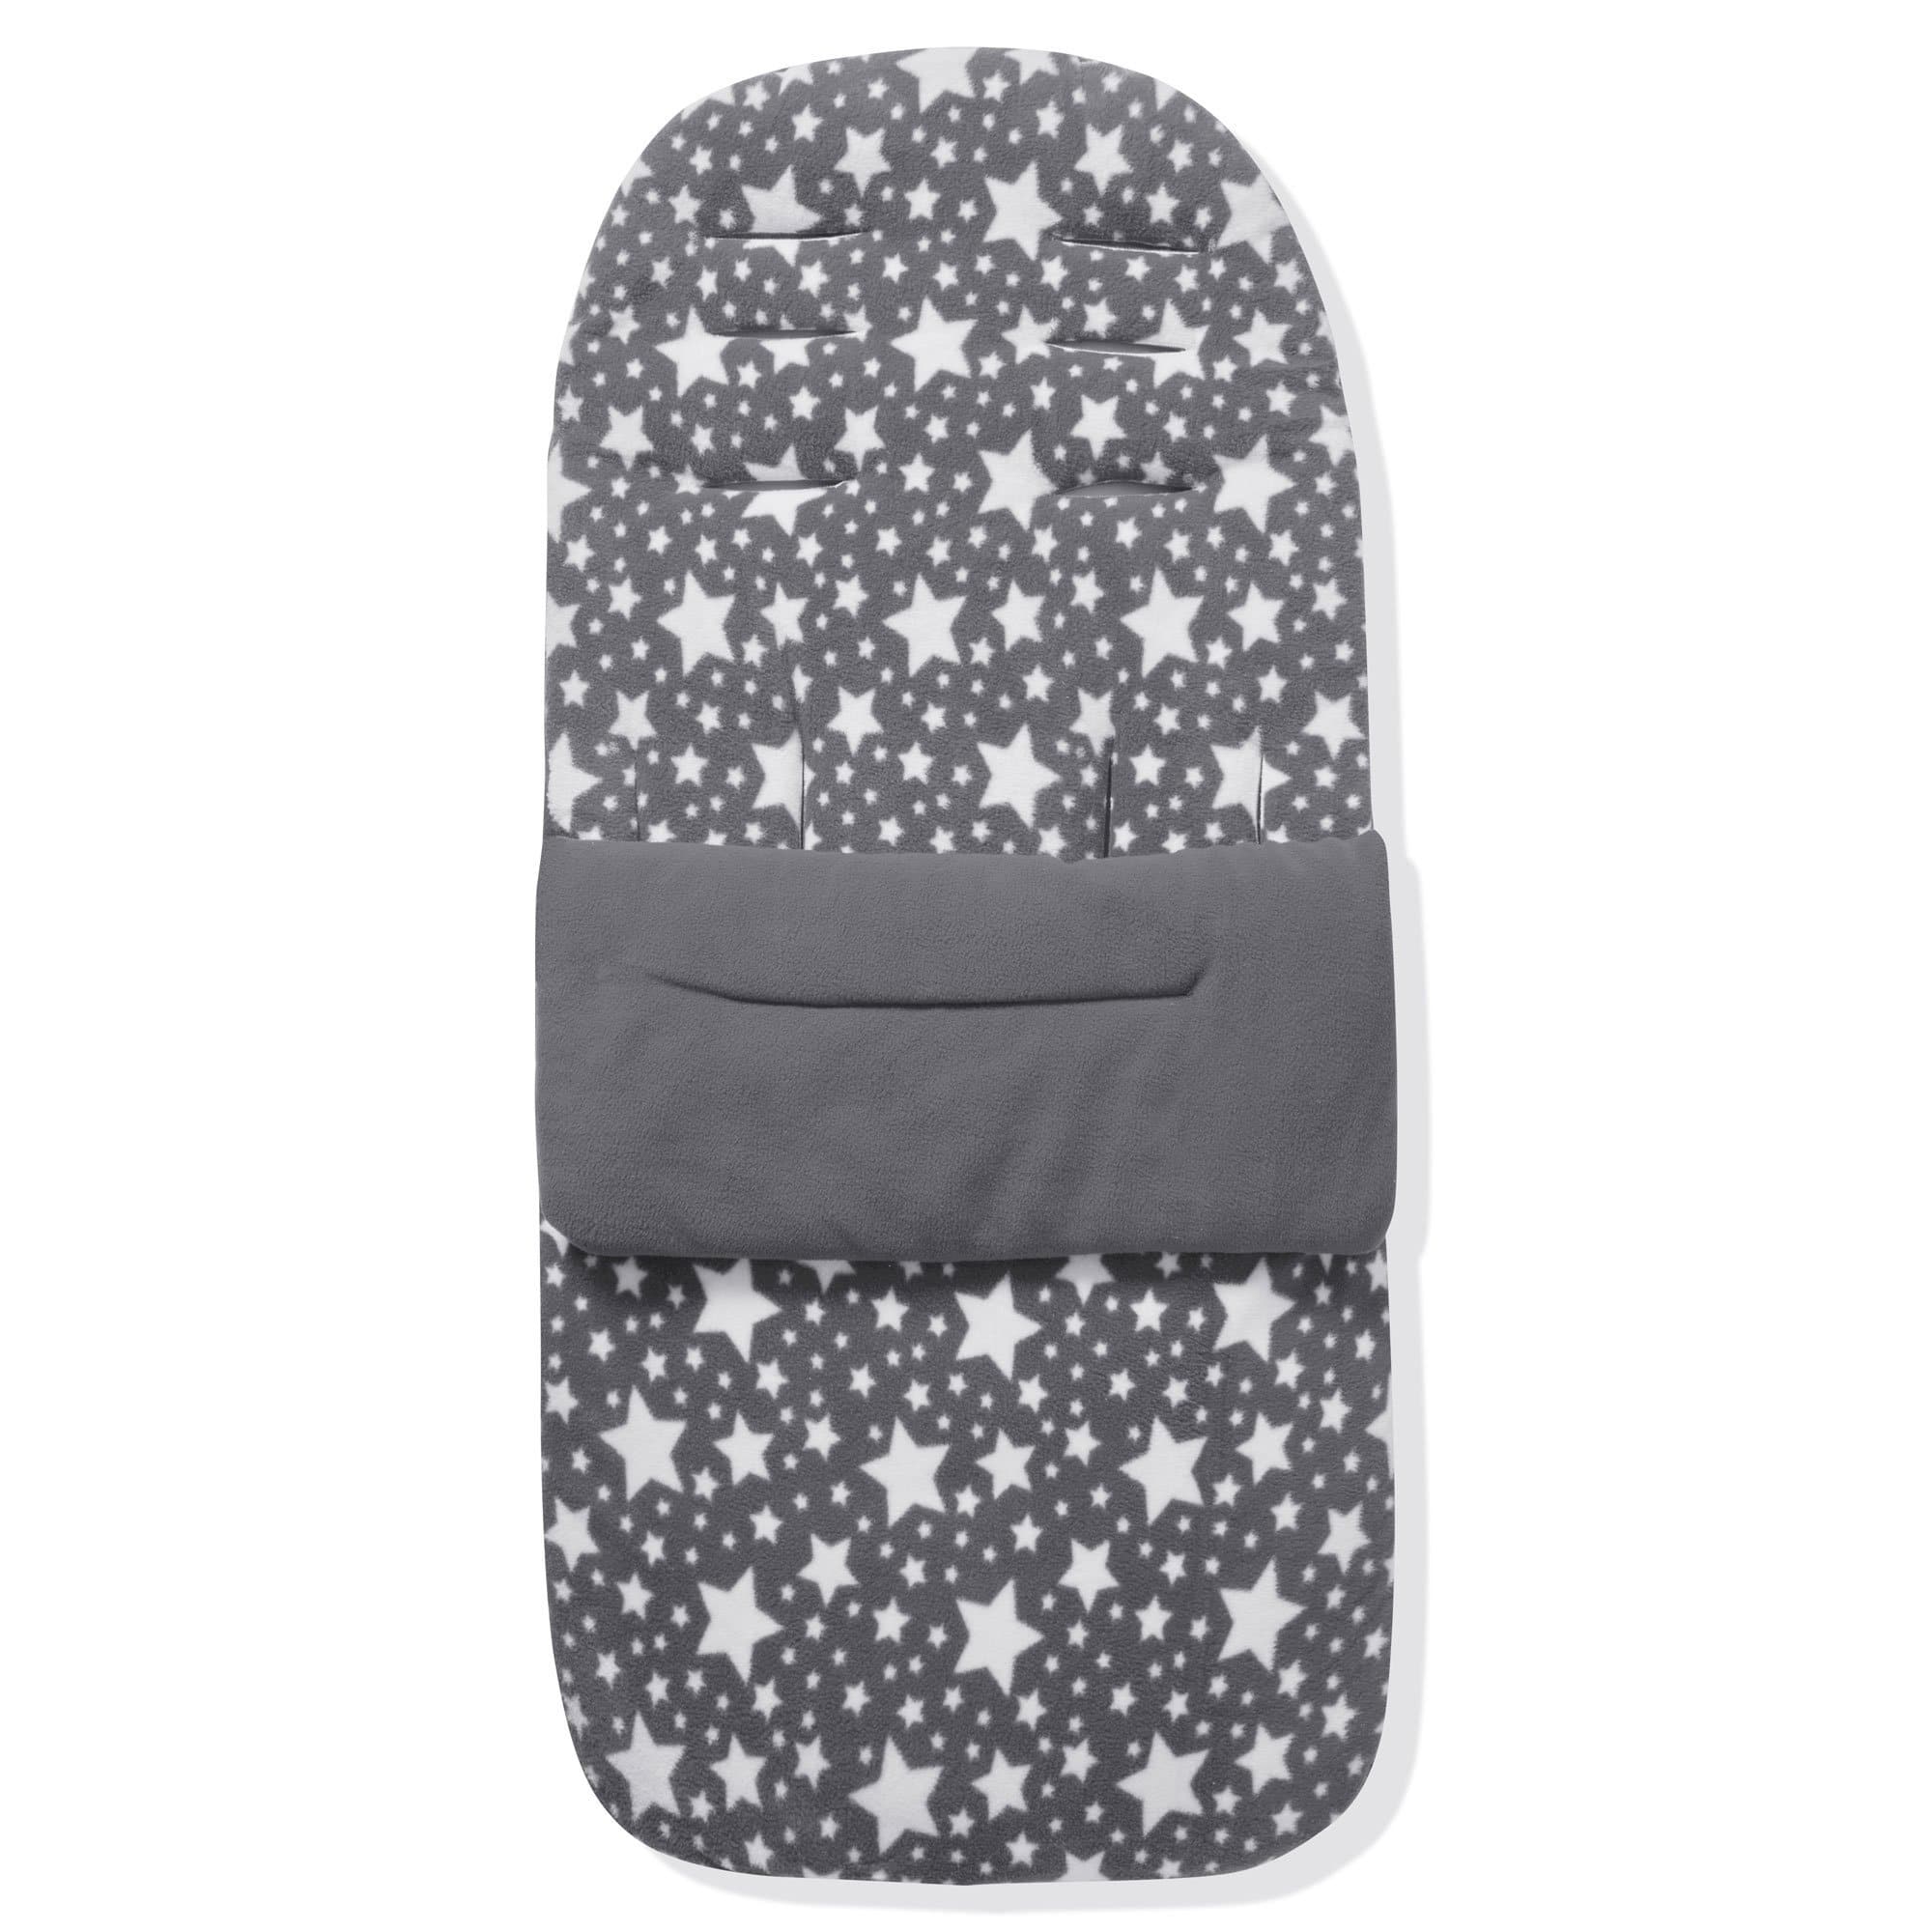 Fleece Footmuff / Cosy Toes Compatible with Kiddicare - Grey Star / Fits All Models | For Your Little One